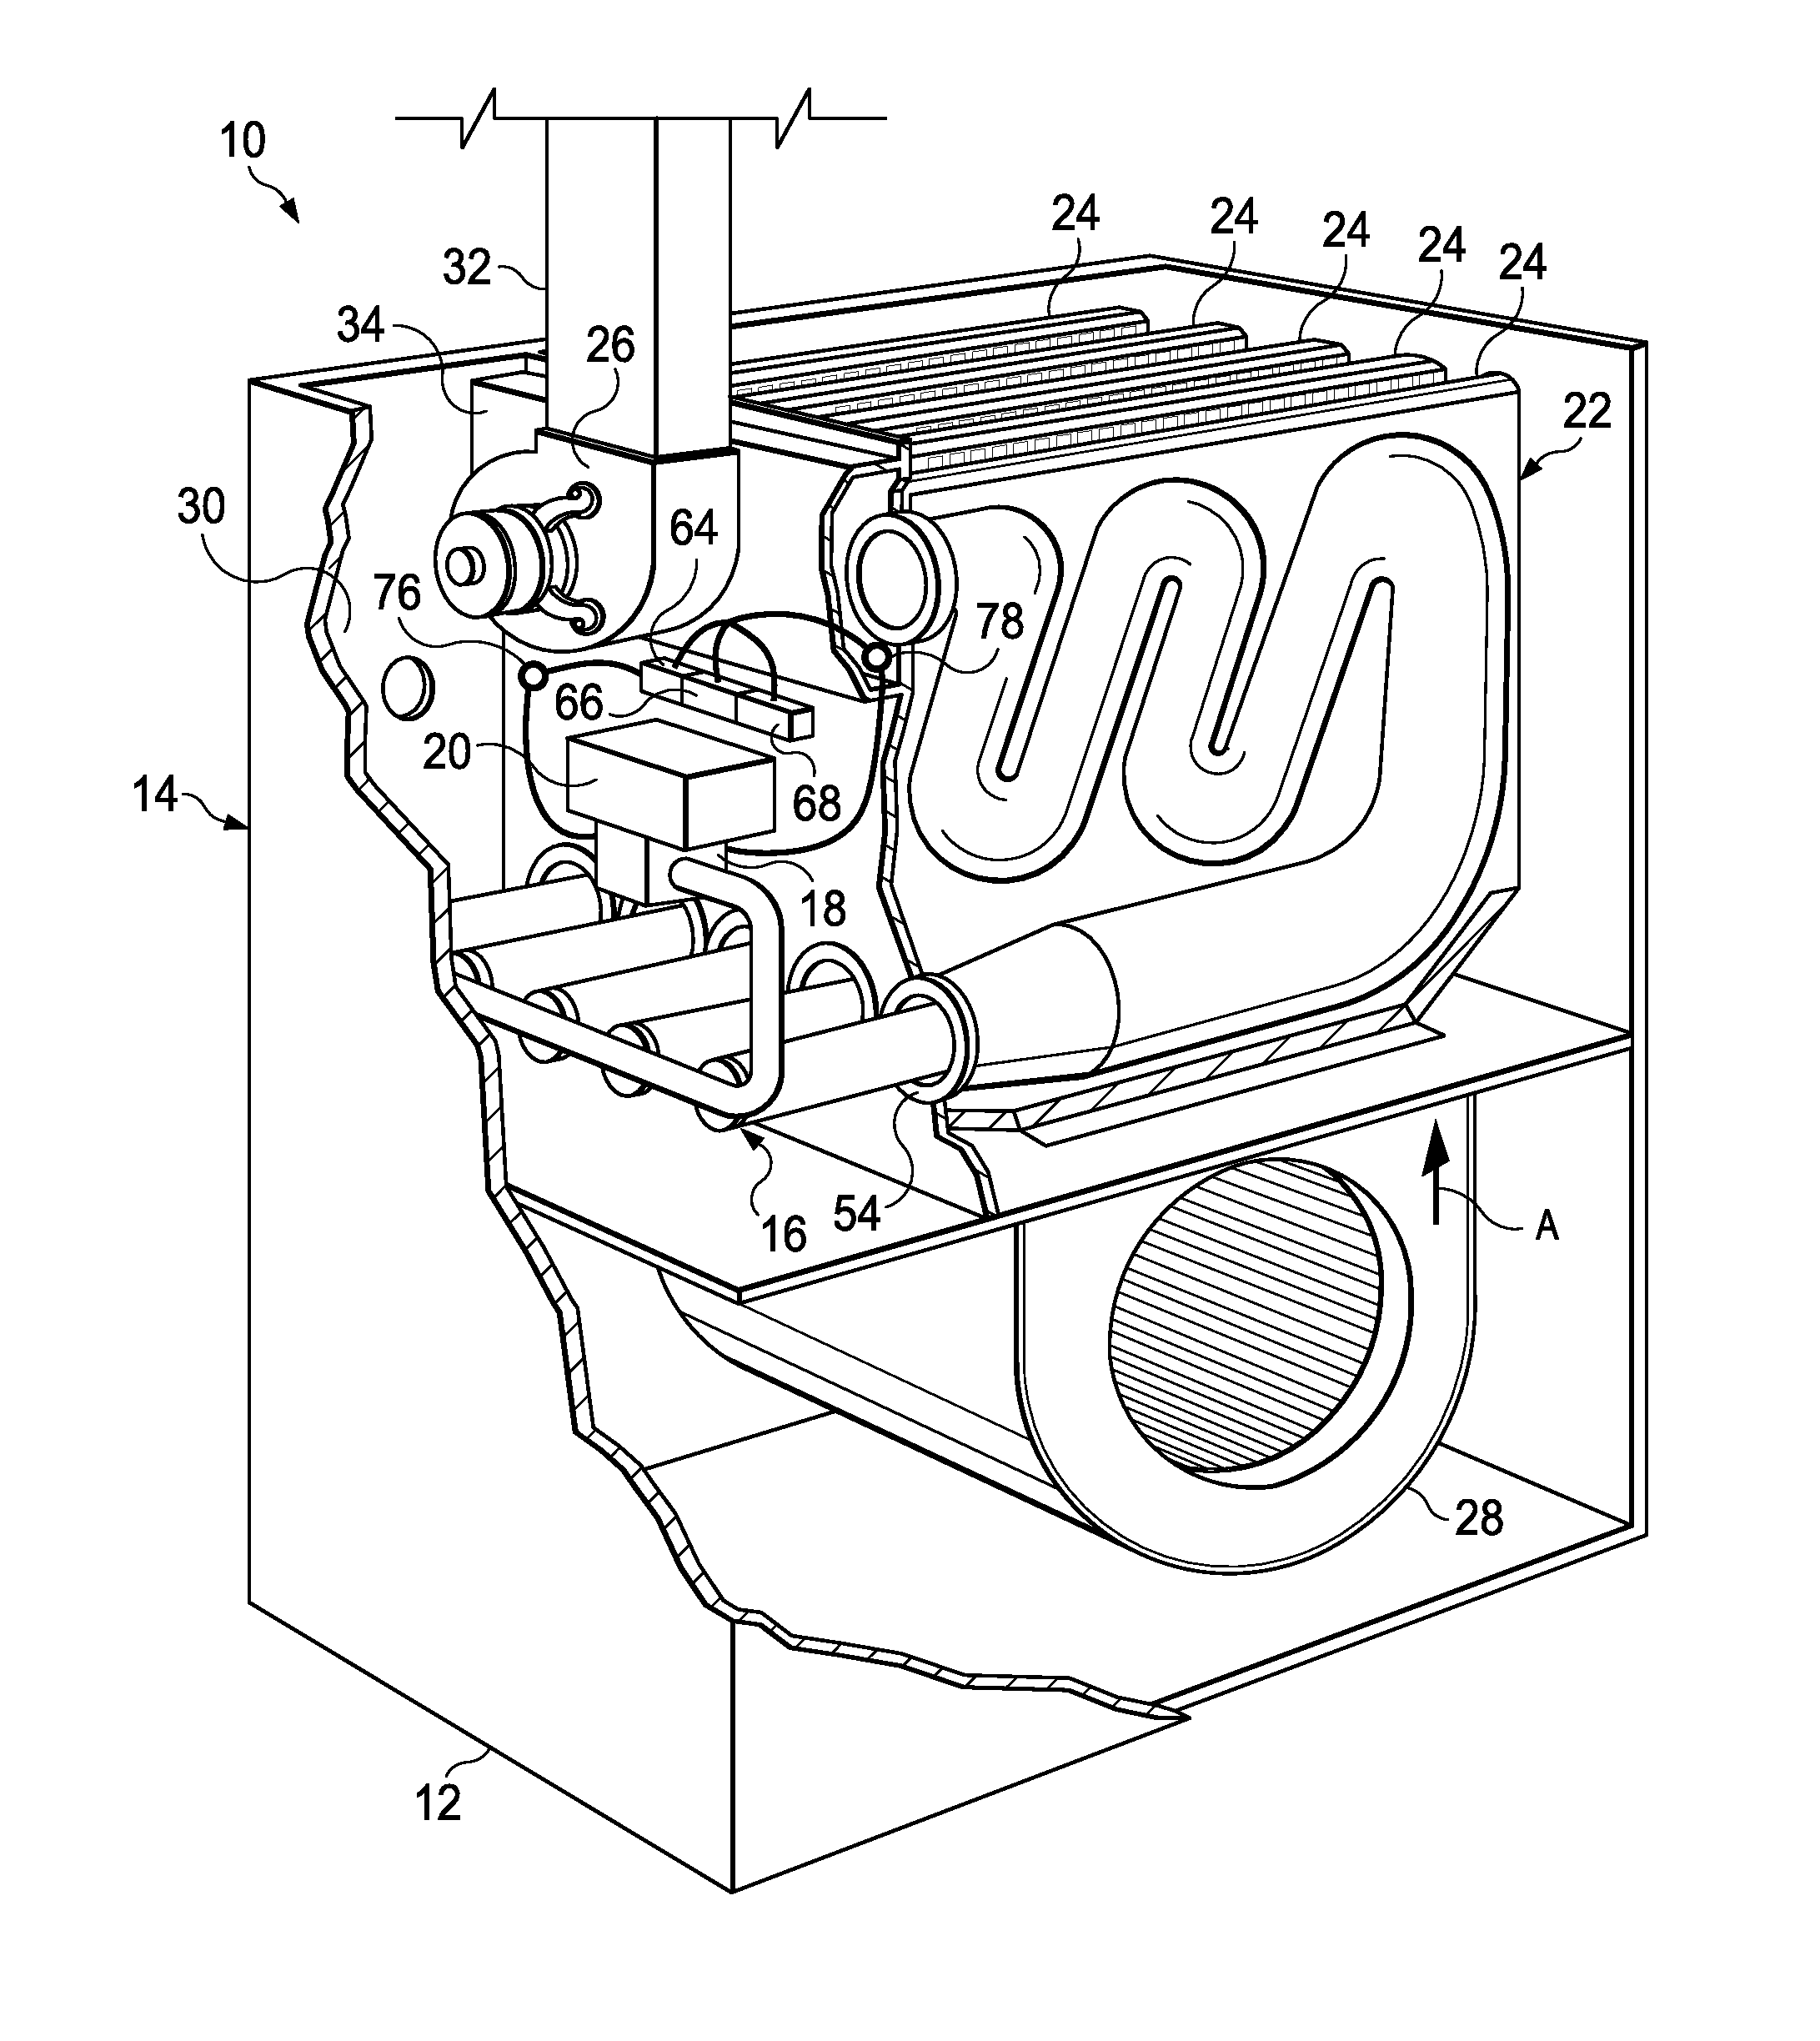 System and method for controlling a furnace